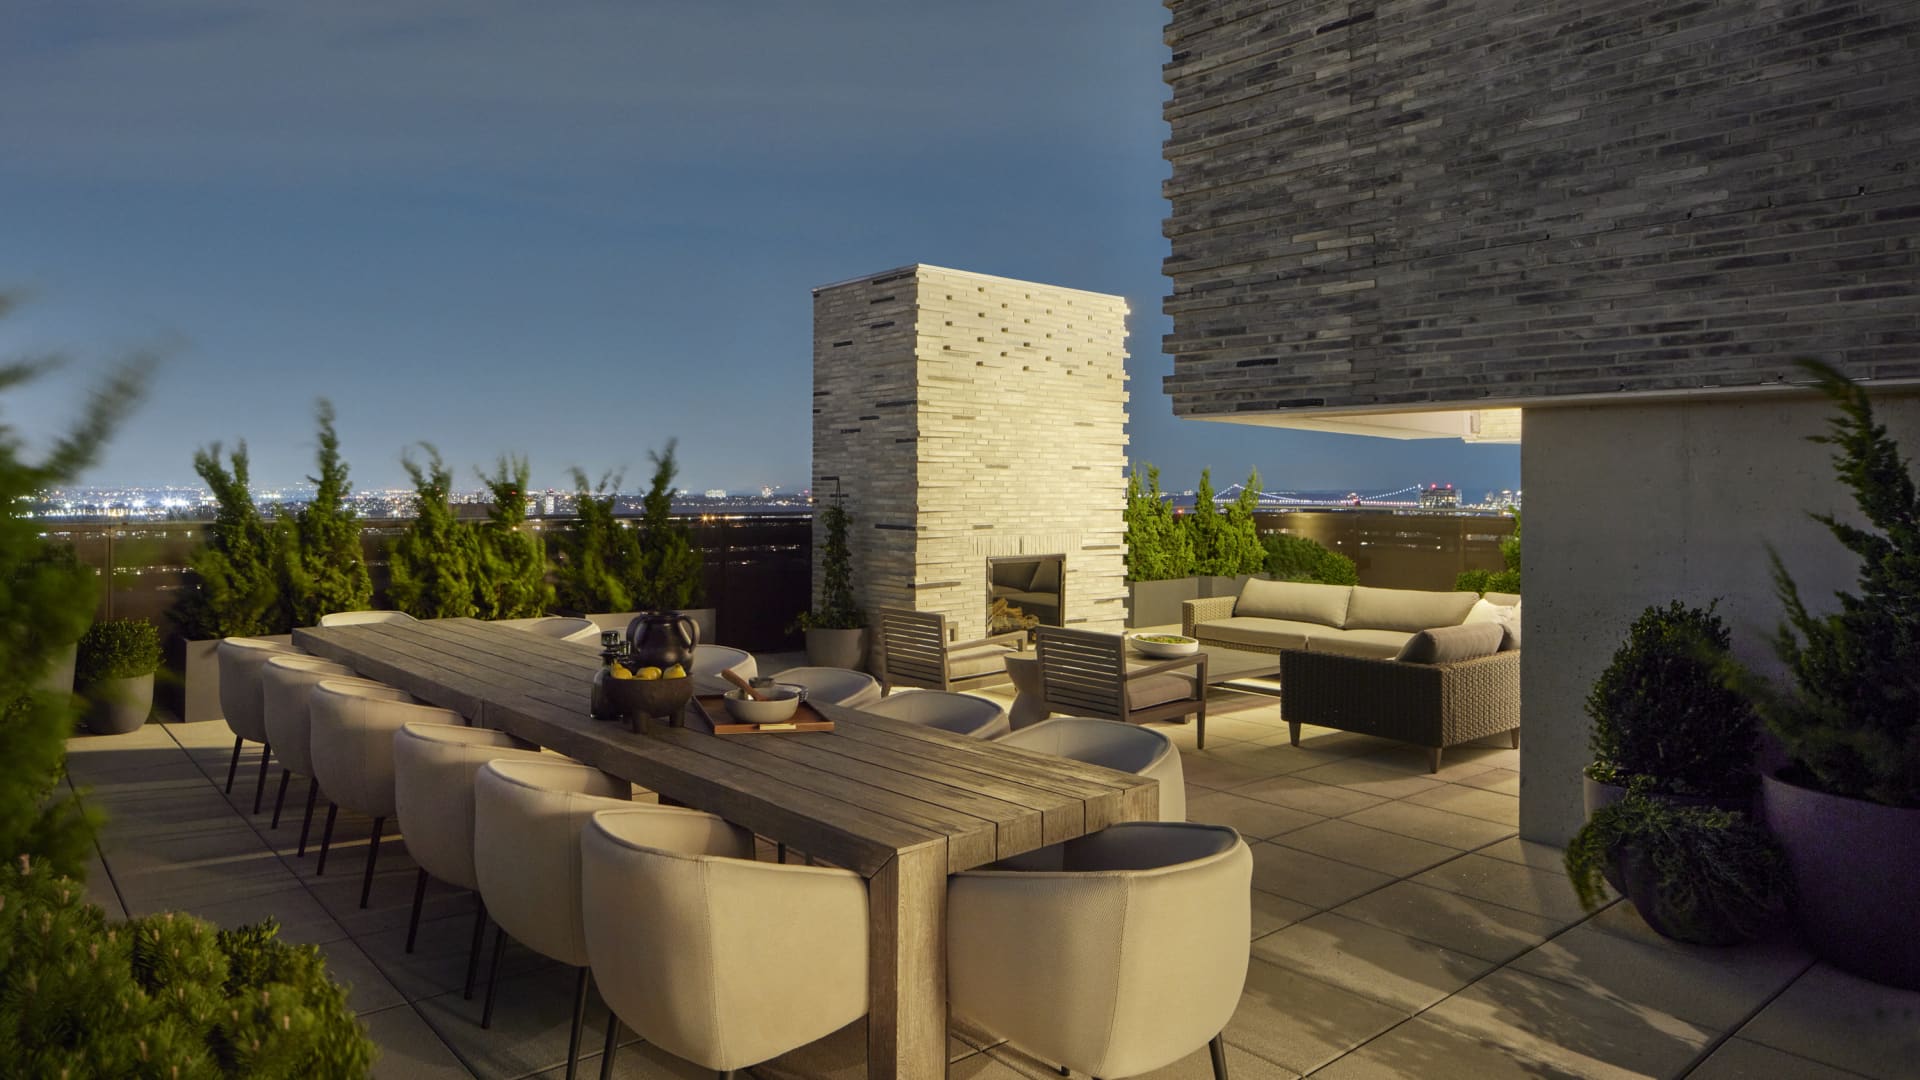 The private roof terrace is over 2100 square feet and has views of New York City in all directions.